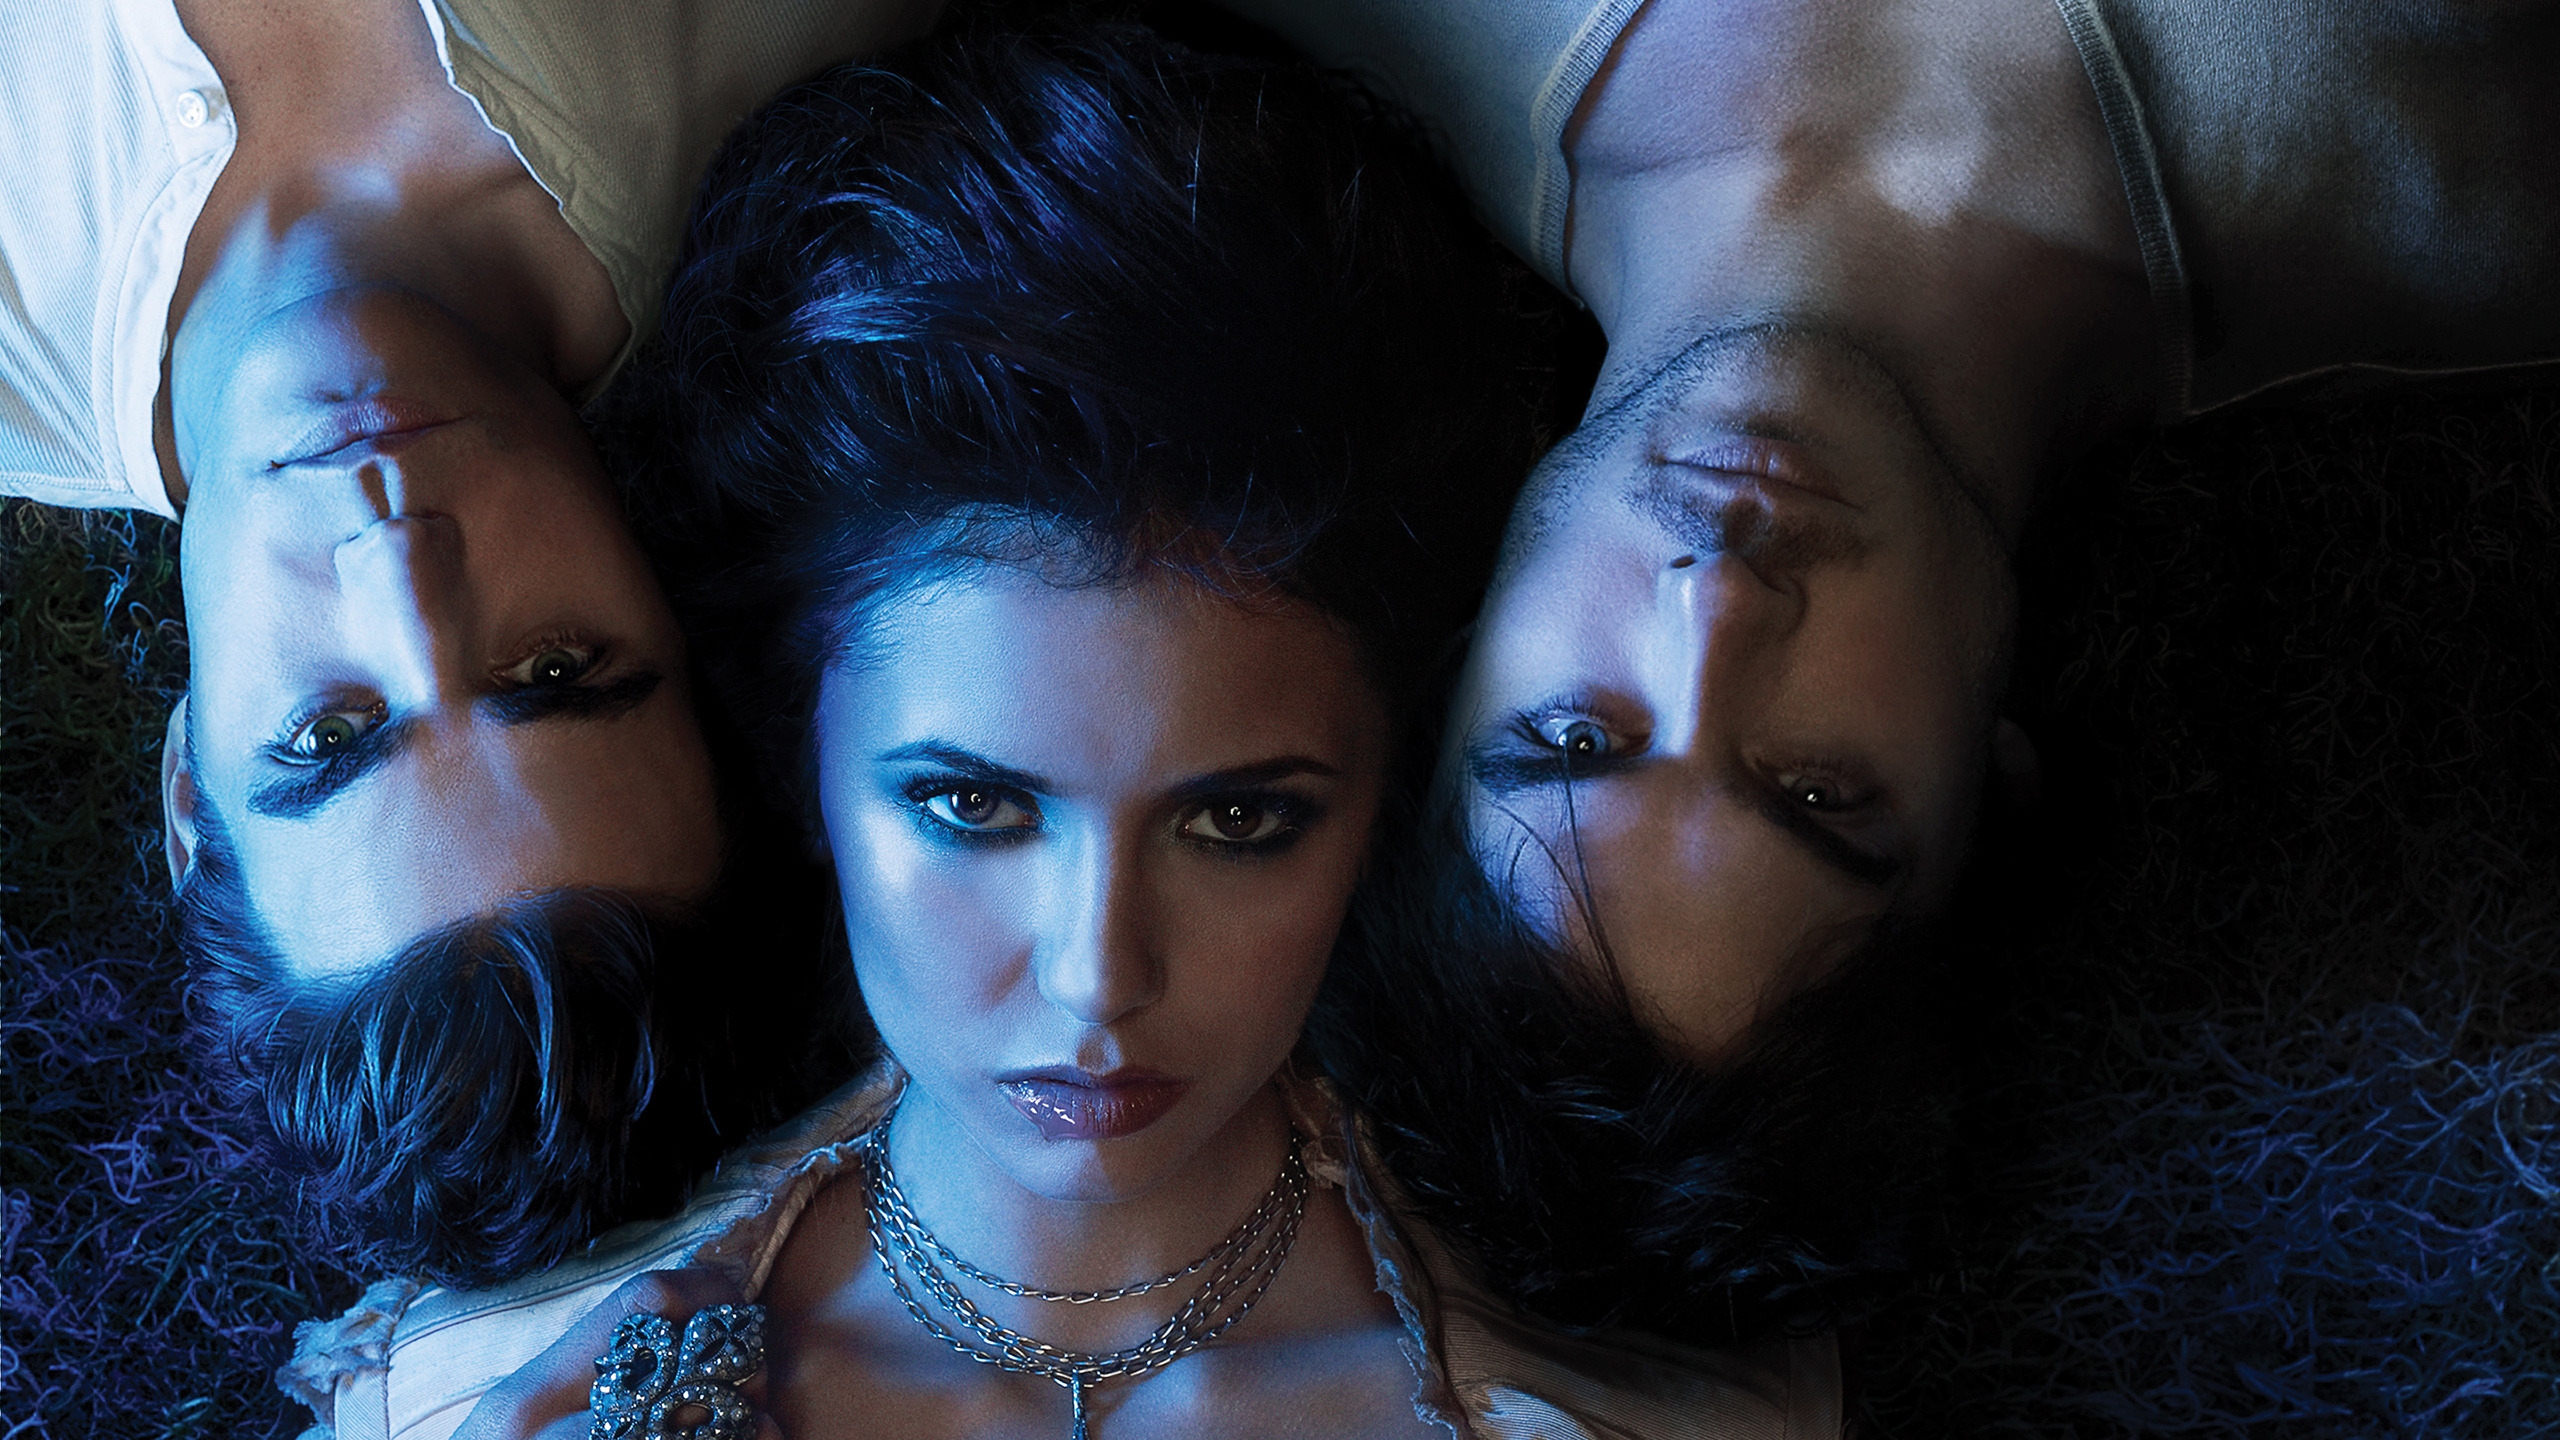 The Beautiful Vampires for 2560x1440 HDTV resolution